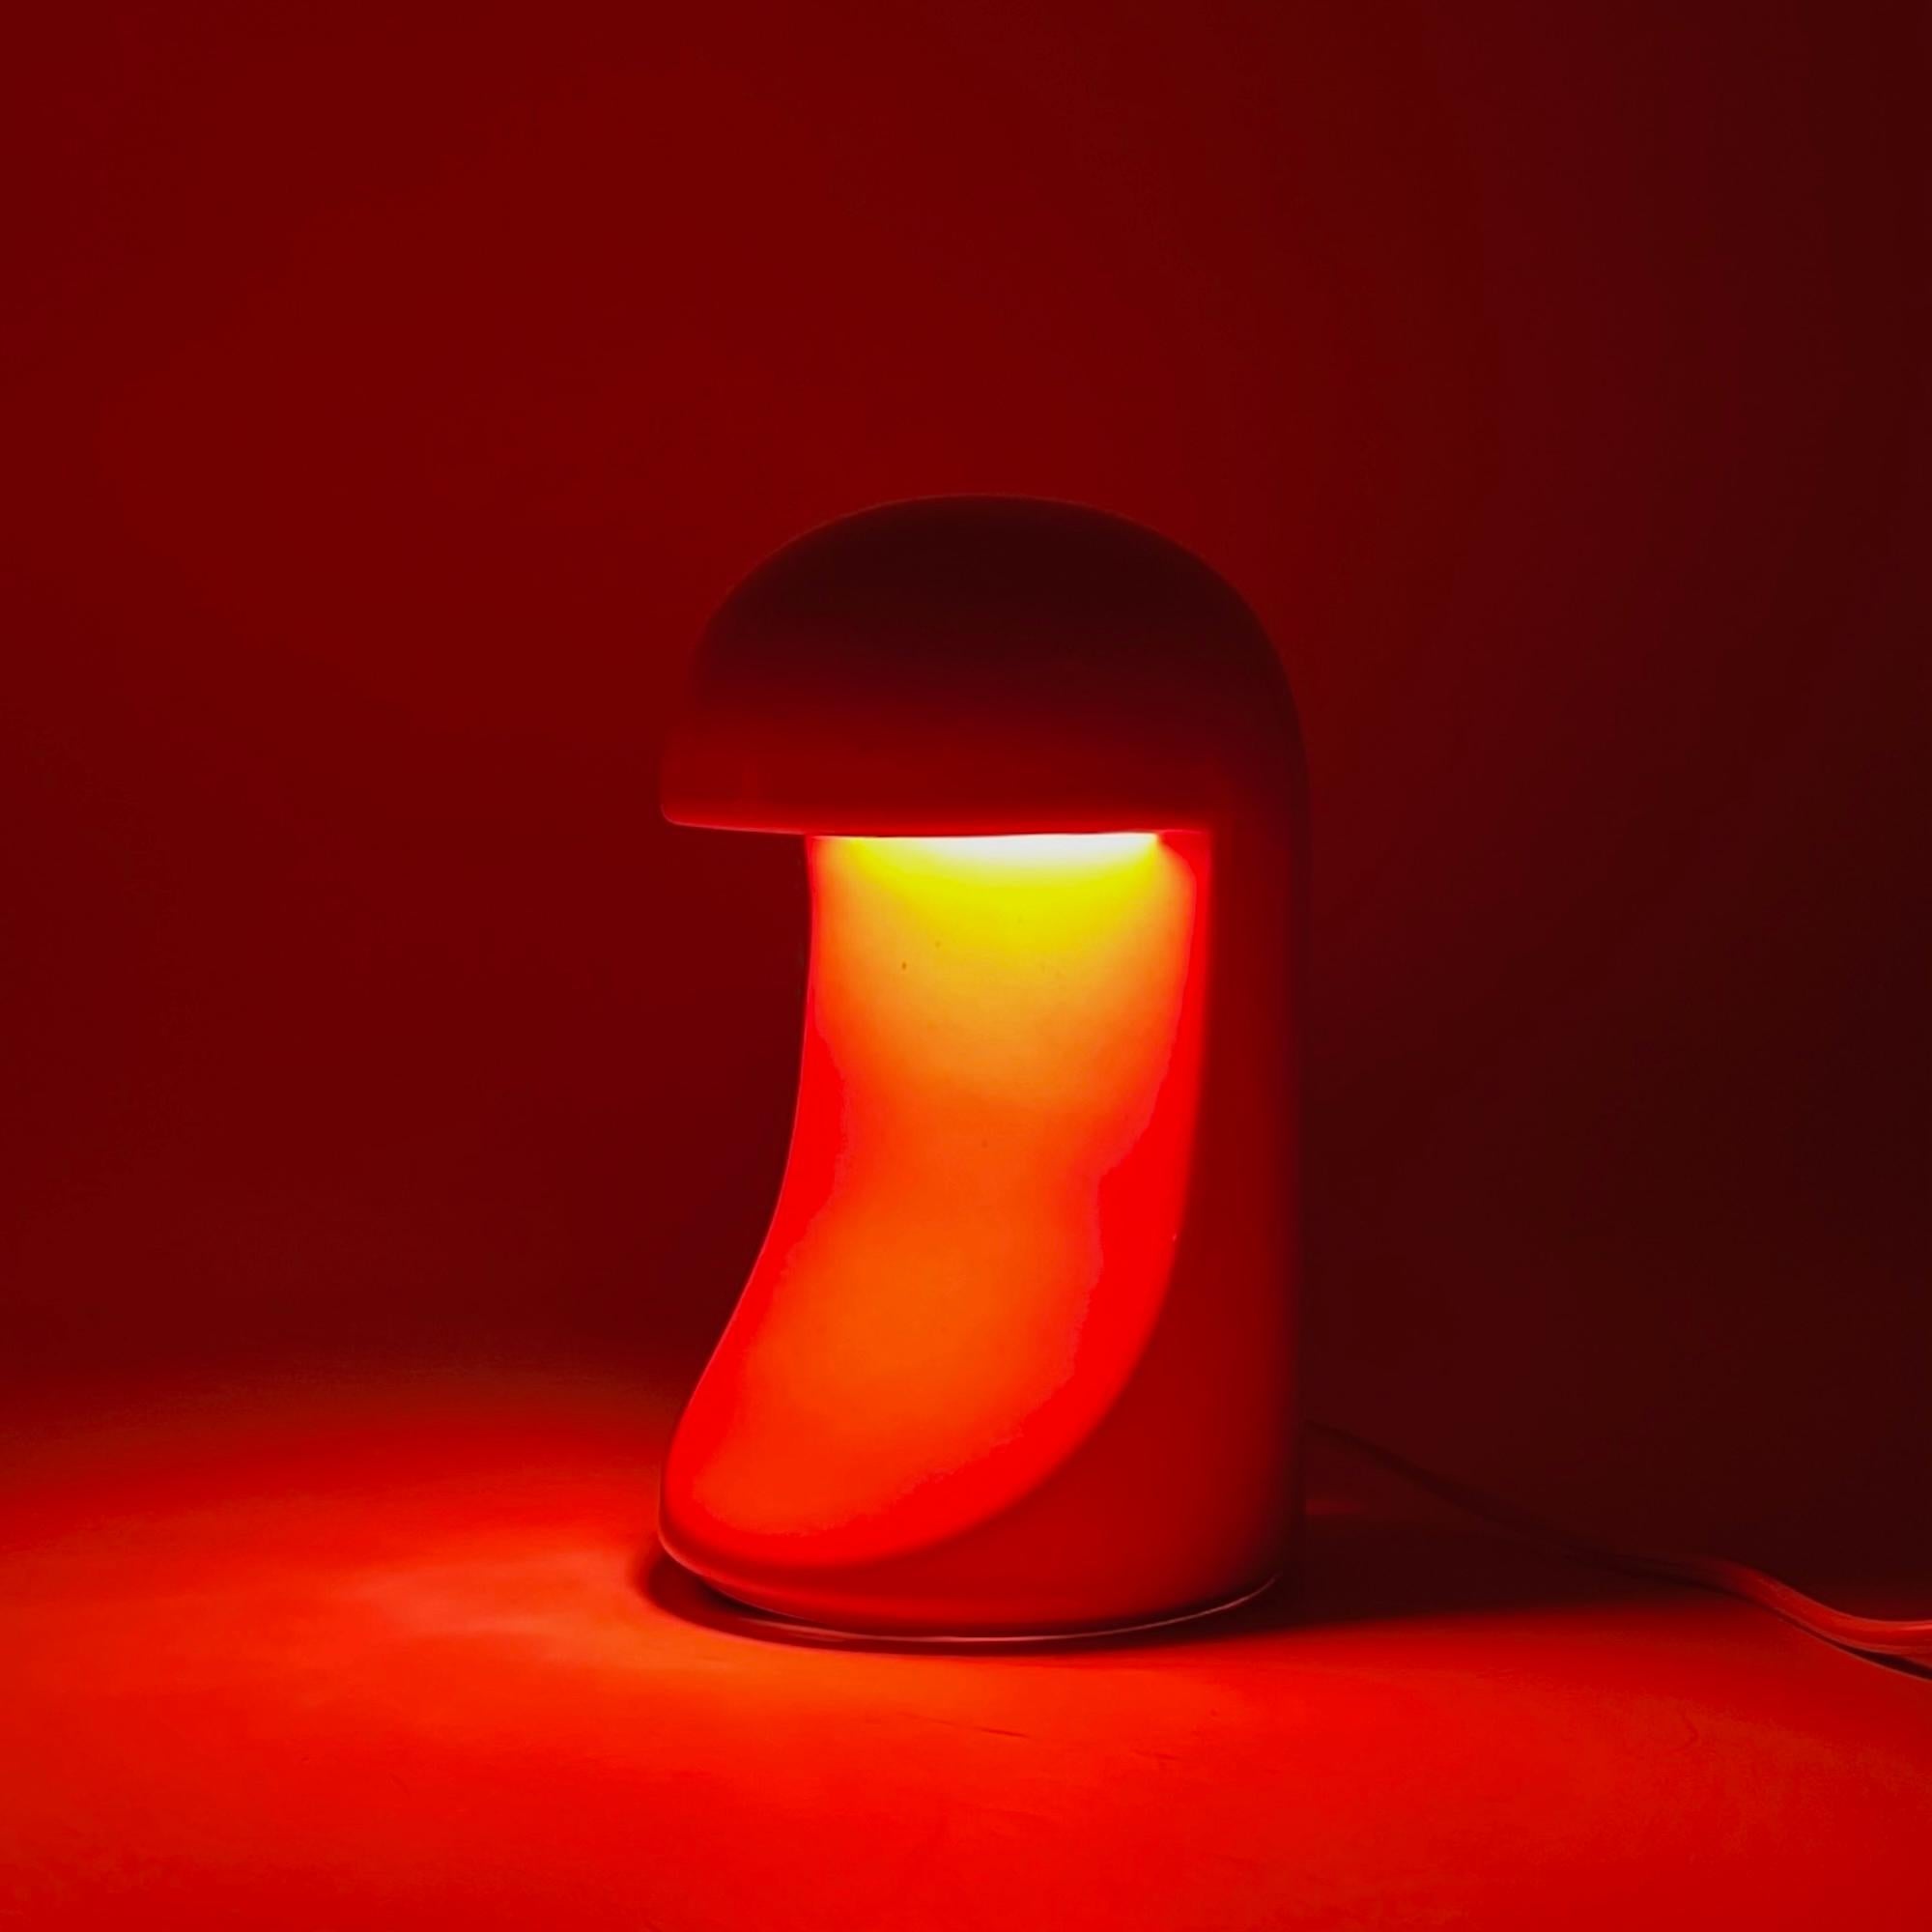 Longobarda is an innovative lamp made of a single ceramic body, designed bin 1966.

Step back into the stylish era of the 60s with the iconic ‘Longobarda’ lamp, a design masterpiece by Marcello Cuneo and meticulously crafted by Gabbianelli. This